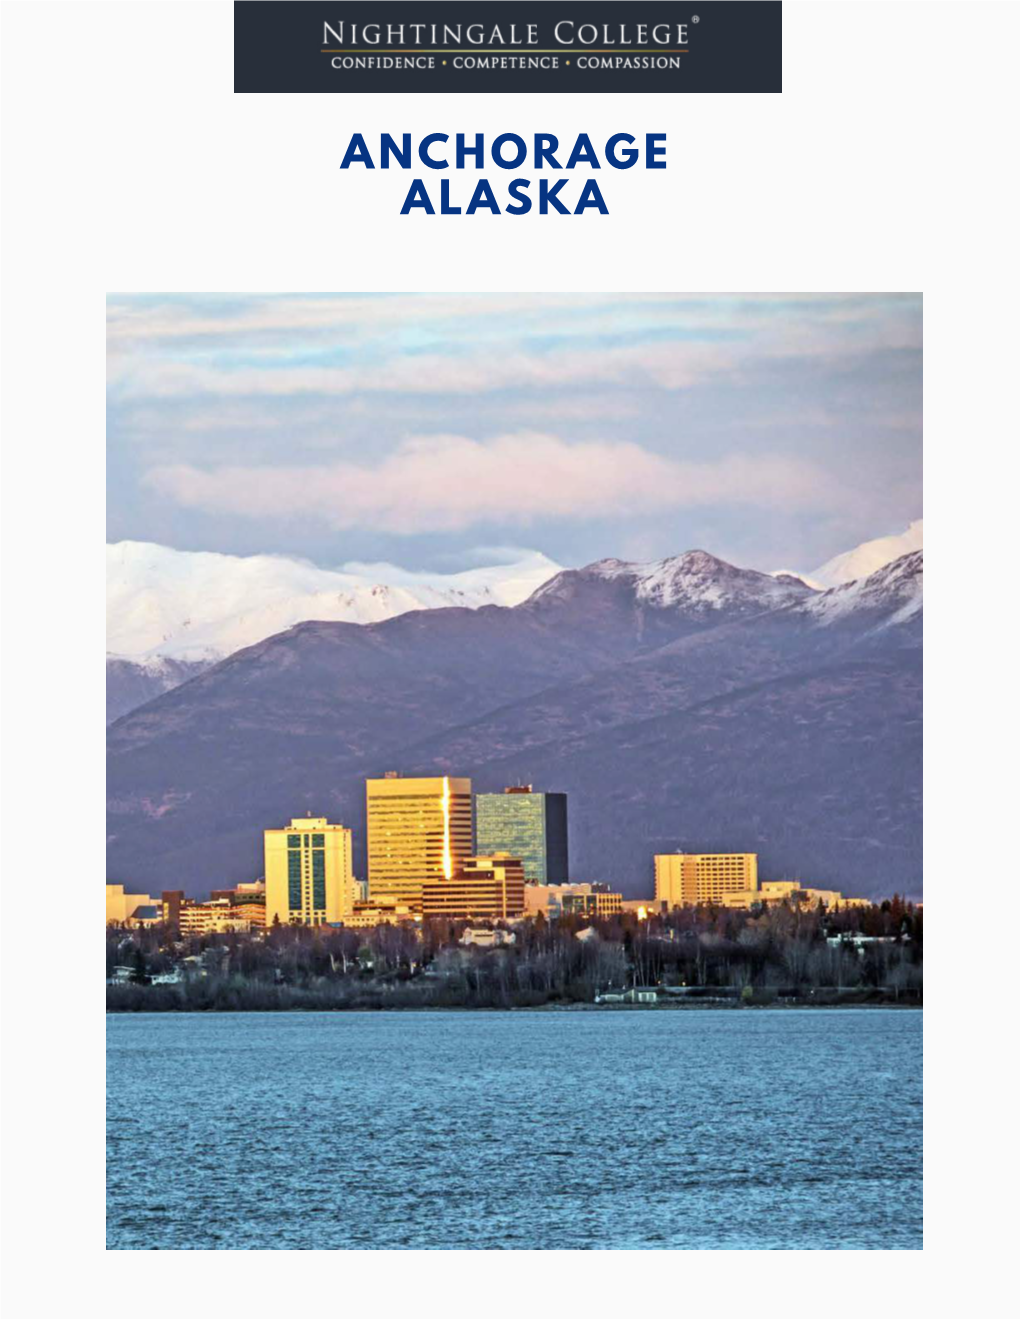 ANCHORAGE ALASKA ALL ABOUT Set Amid the Coastal Chugach Mountains, Anchorage Defies Popular Visions of Polar Ice ANCHORAGE Caps and Frozen Tundra